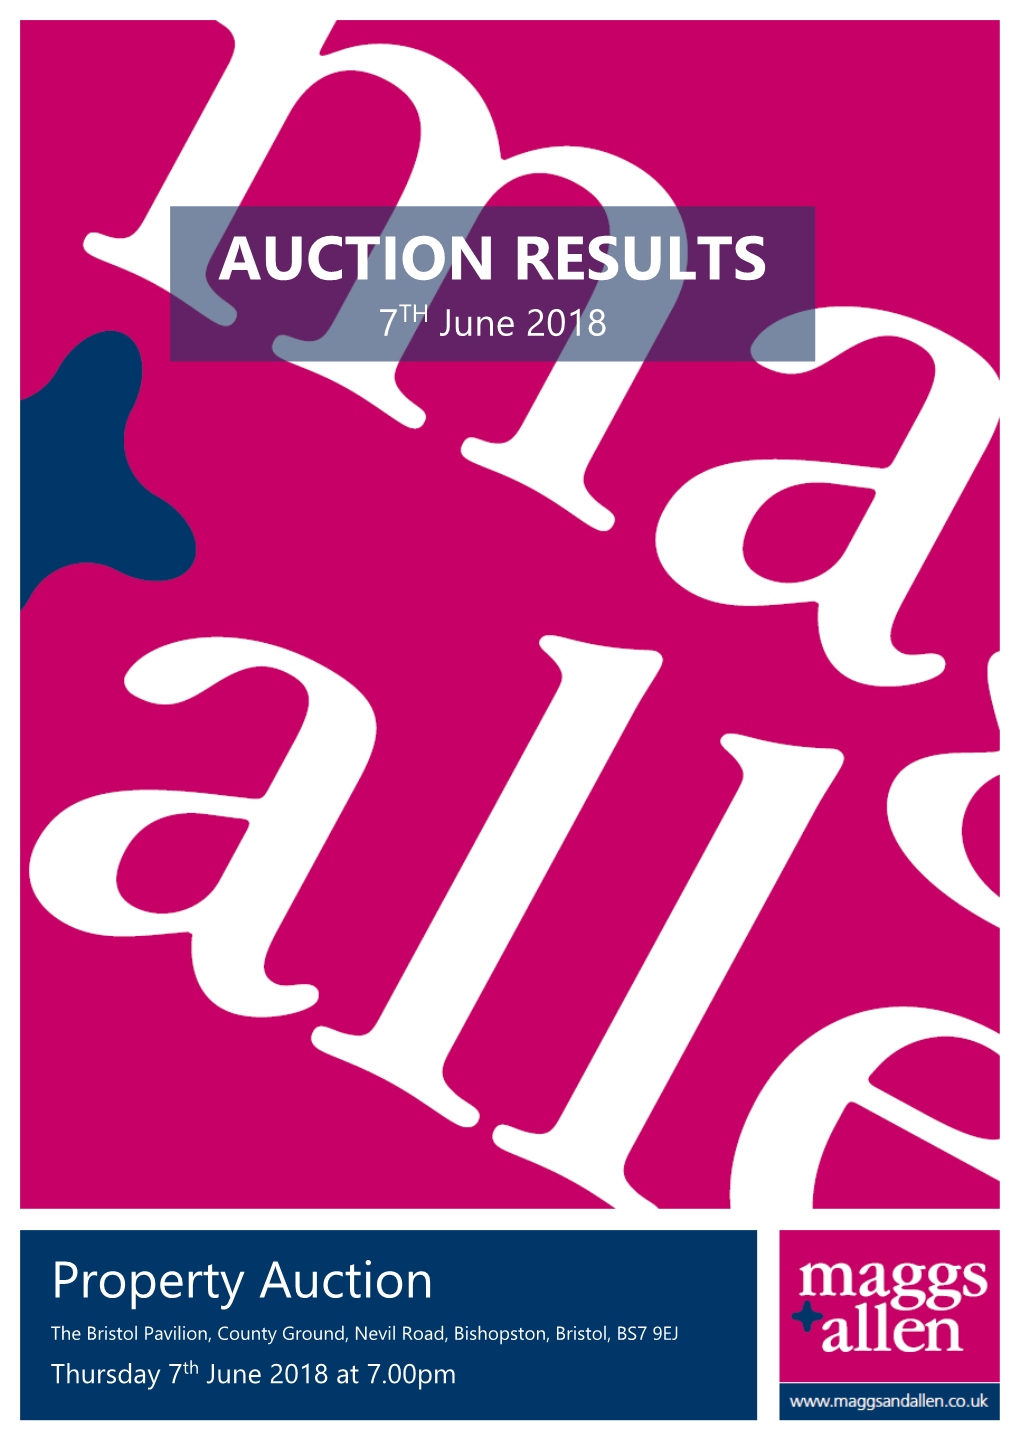 AUCTION RESULTS 7TH June 2018